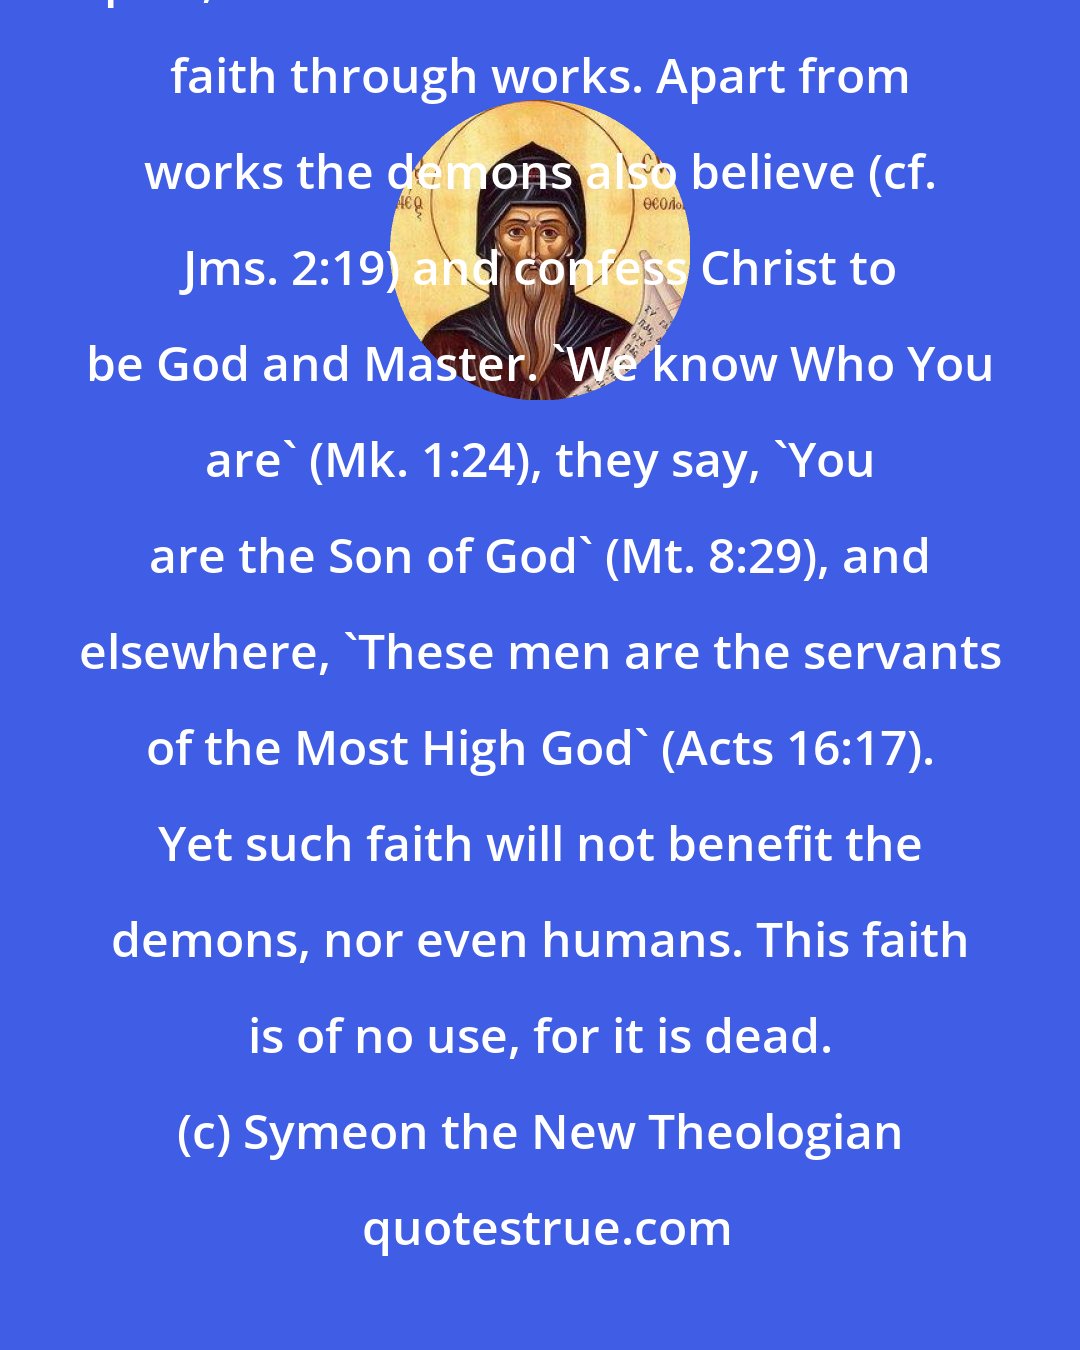 Symeon the New Theologian: Unbelievers, those who believe with difficulty, or believe in part, are those who do not show their faith through works. Apart from works the demons also believe (cf. Jms. 2:19) and confess Christ to be God and Master. 'We know Who You are' (Mk. 1:24), they say, 'You are the Son of God' (Mt. 8:29), and elsewhere, 'These men are the servants of the Most High God' (Acts 16:17). Yet such faith will not benefit the demons, nor even humans. This faith is of no use, for it is dead.